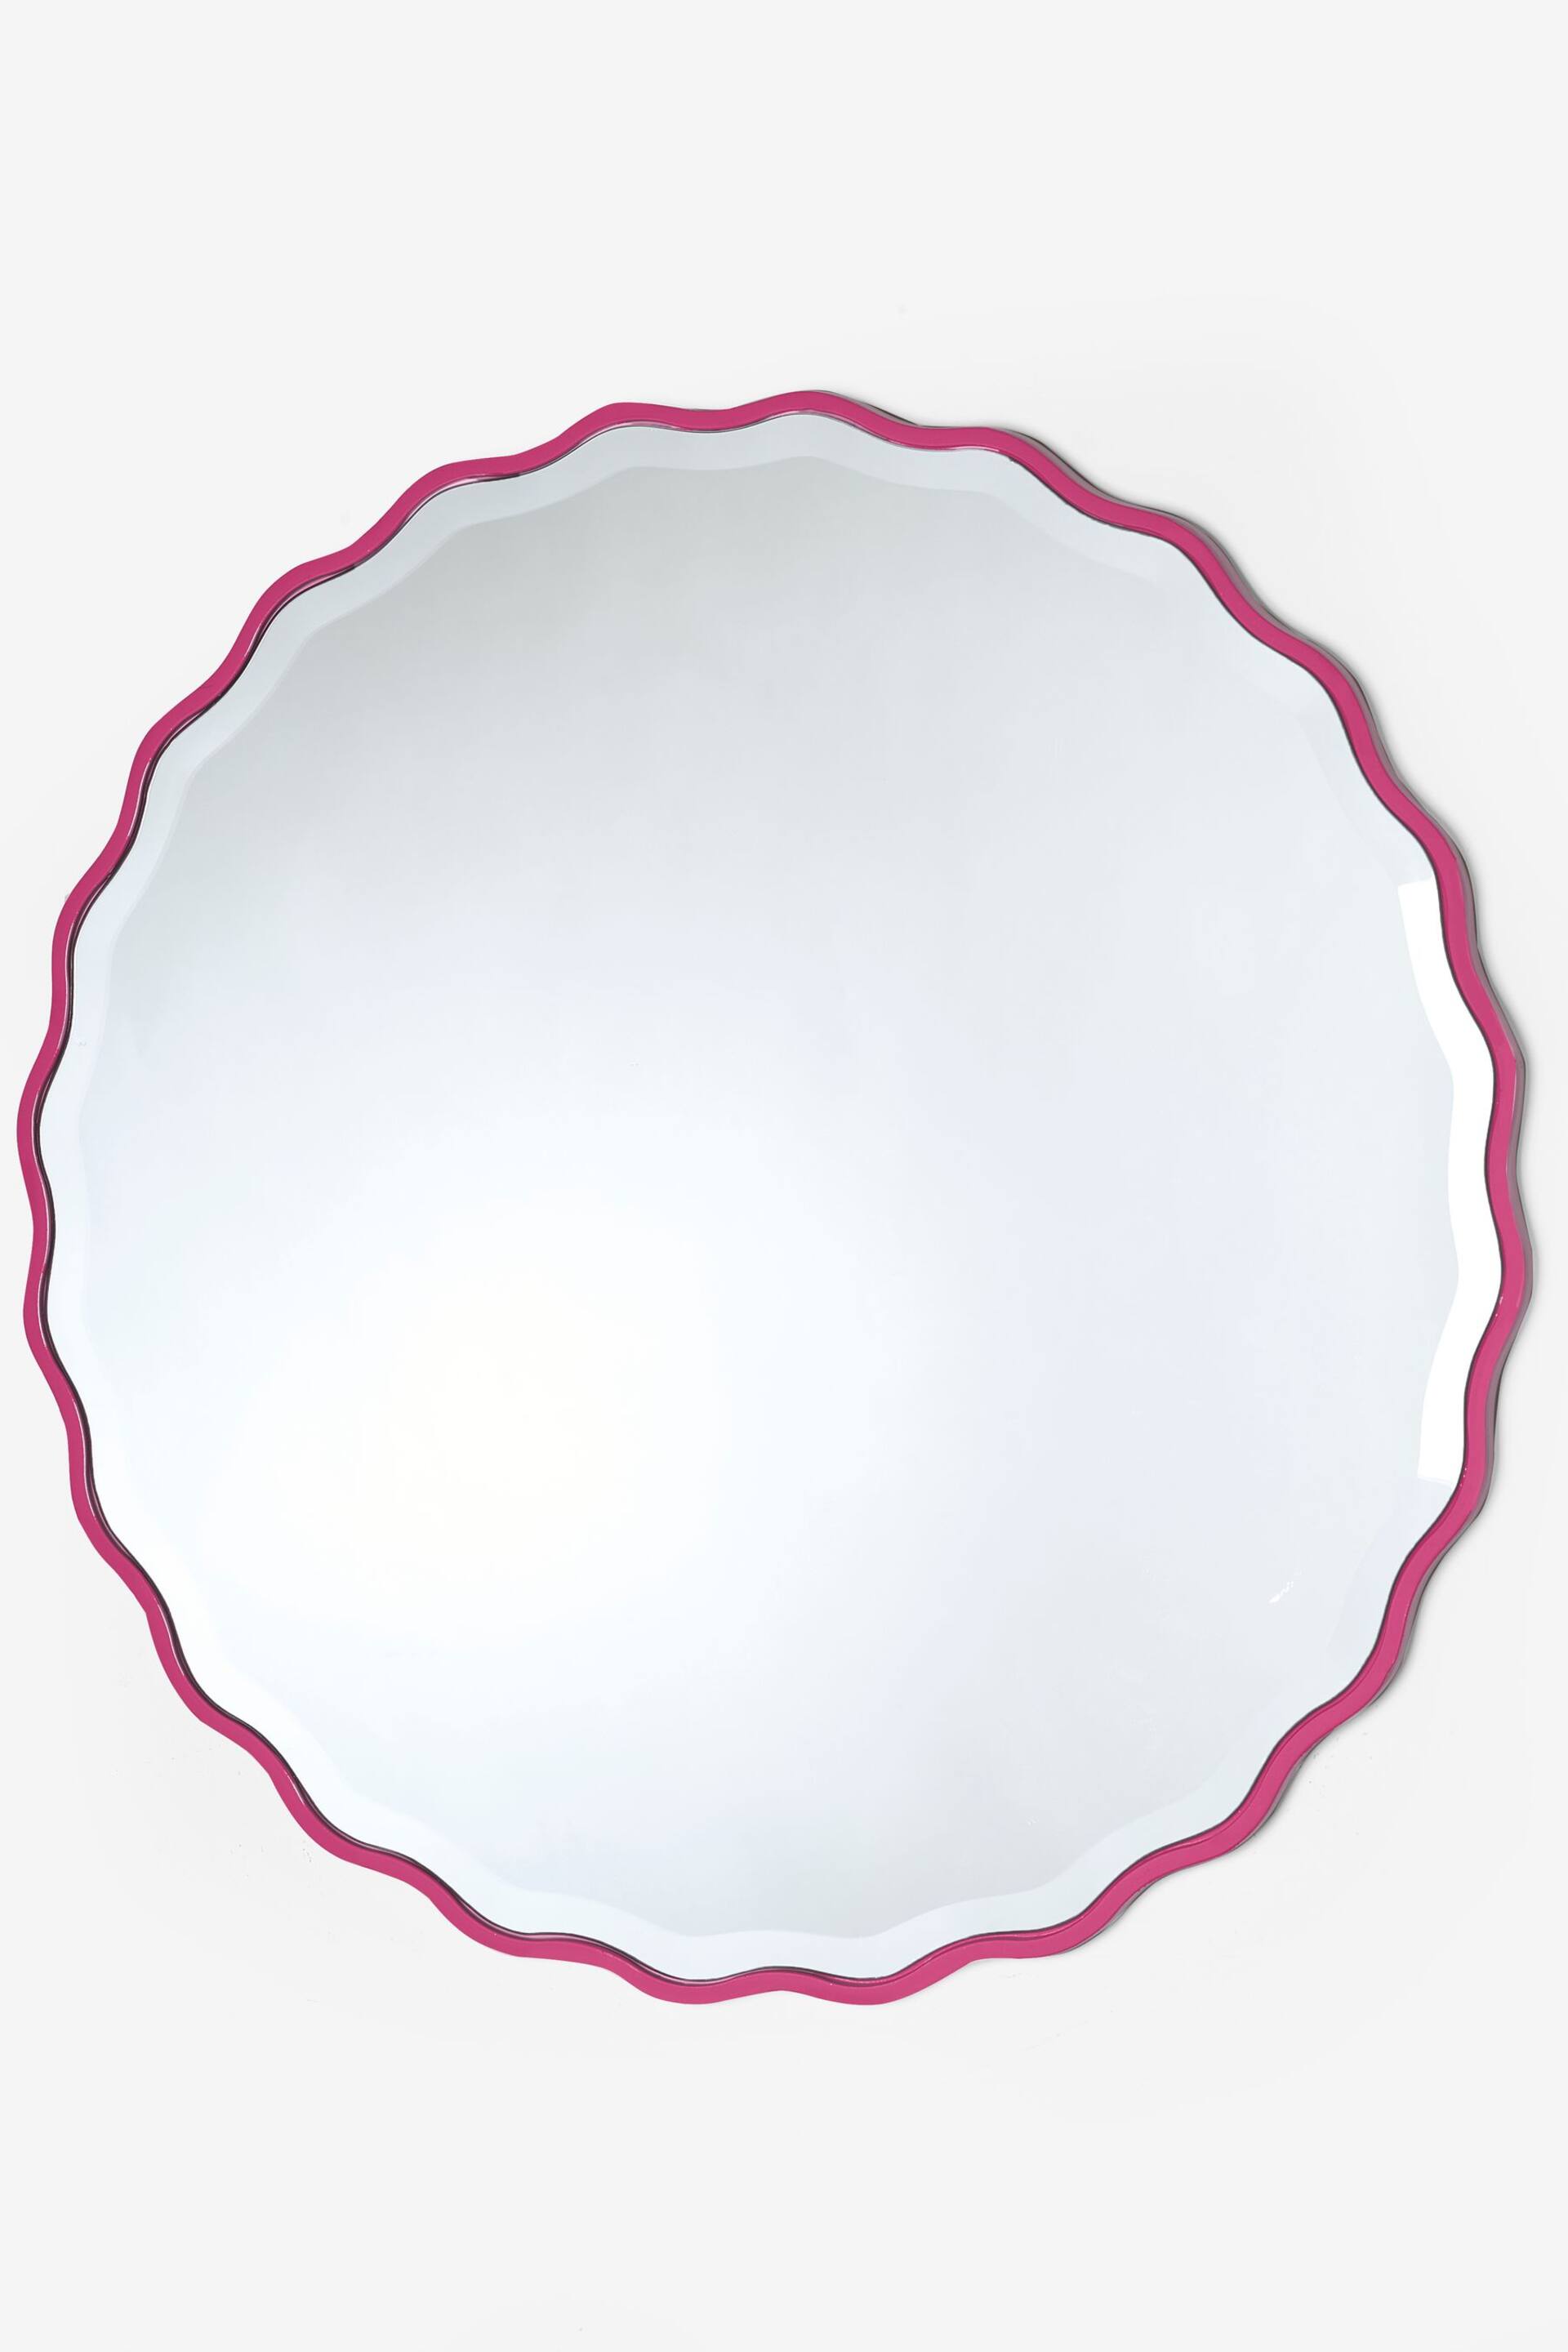 Pink Scalloped Round Wall Mirror 60x60cm - Image 4 of 5